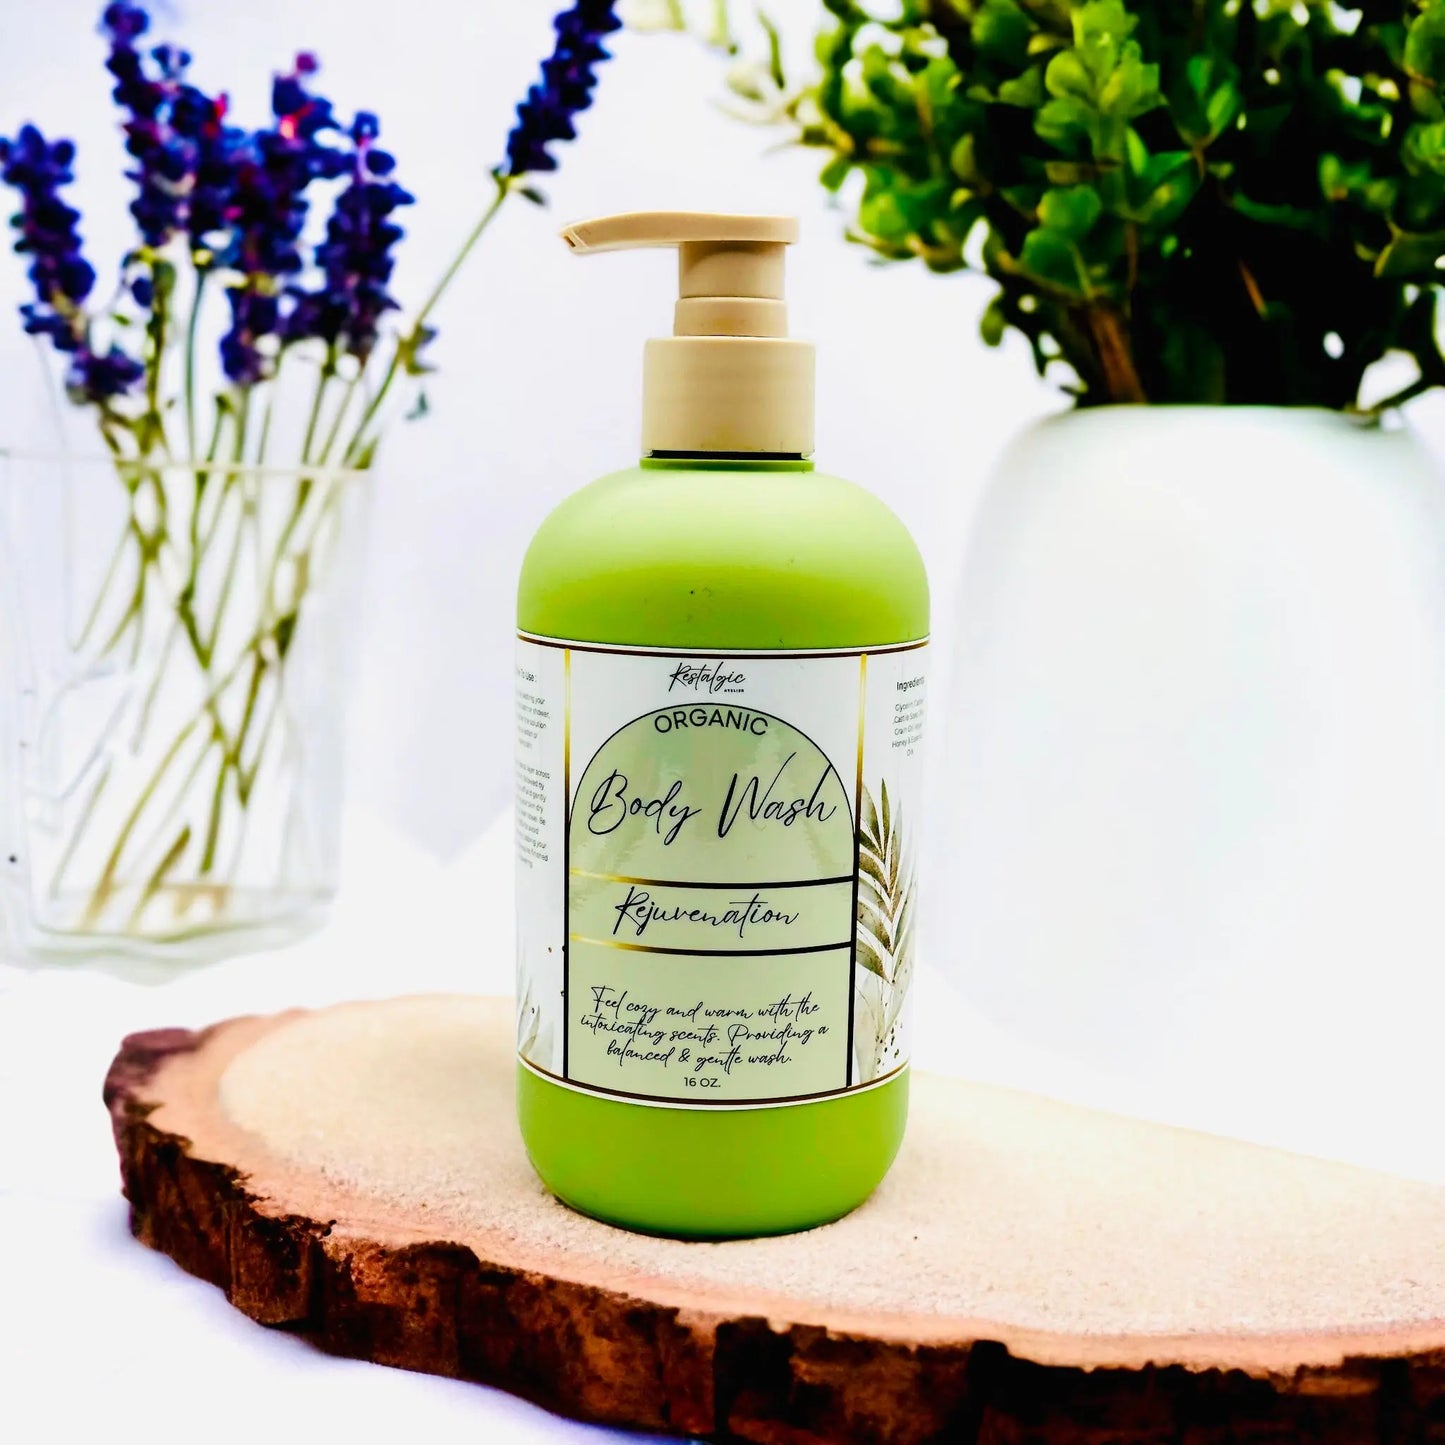 All Natural Body Wash  "Foaming and Hydrating" Restalgic Atelier